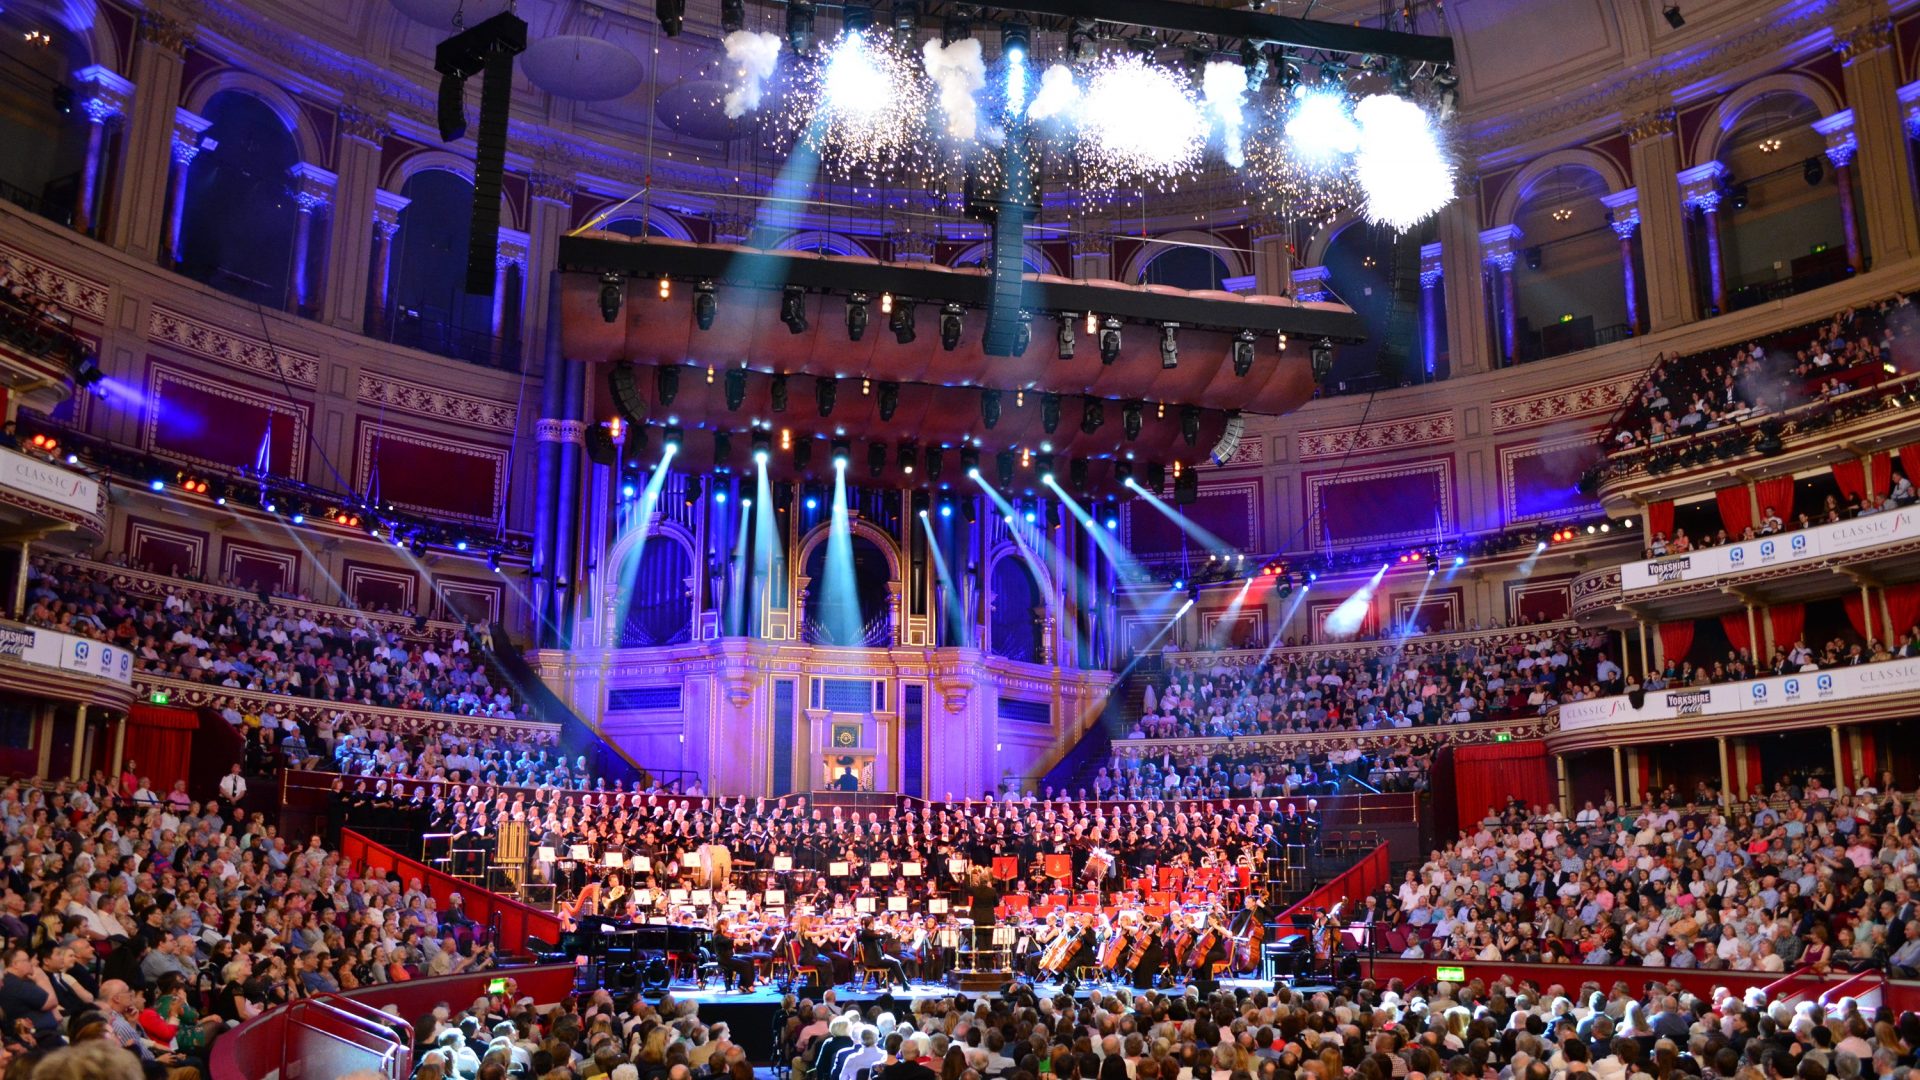 The Orchestra perform on the Royal Albert Hall stage with indoor fireworks and purple lights.